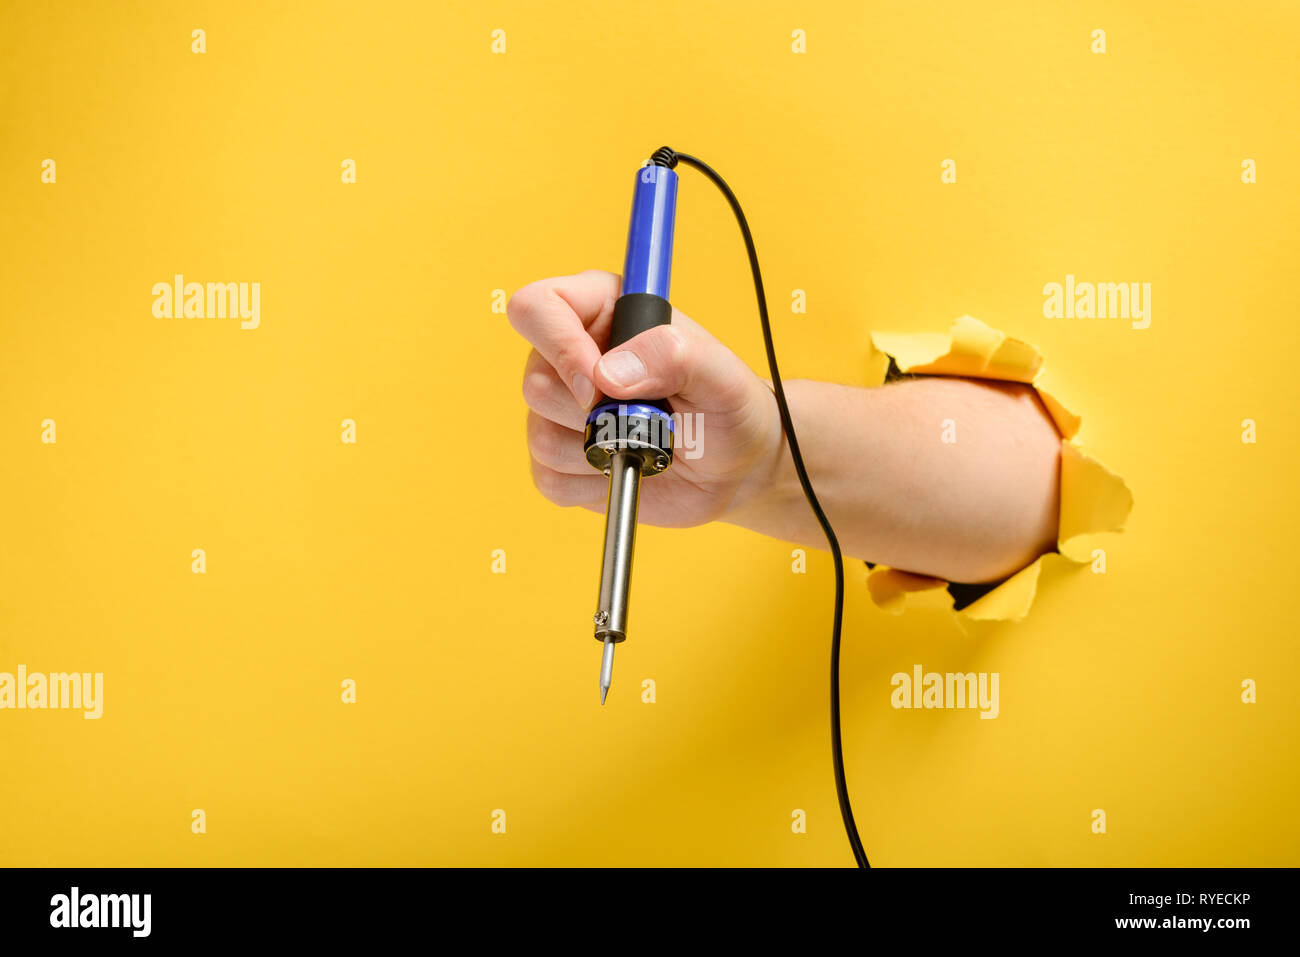 Hand holding a soldering iron Stock Photo